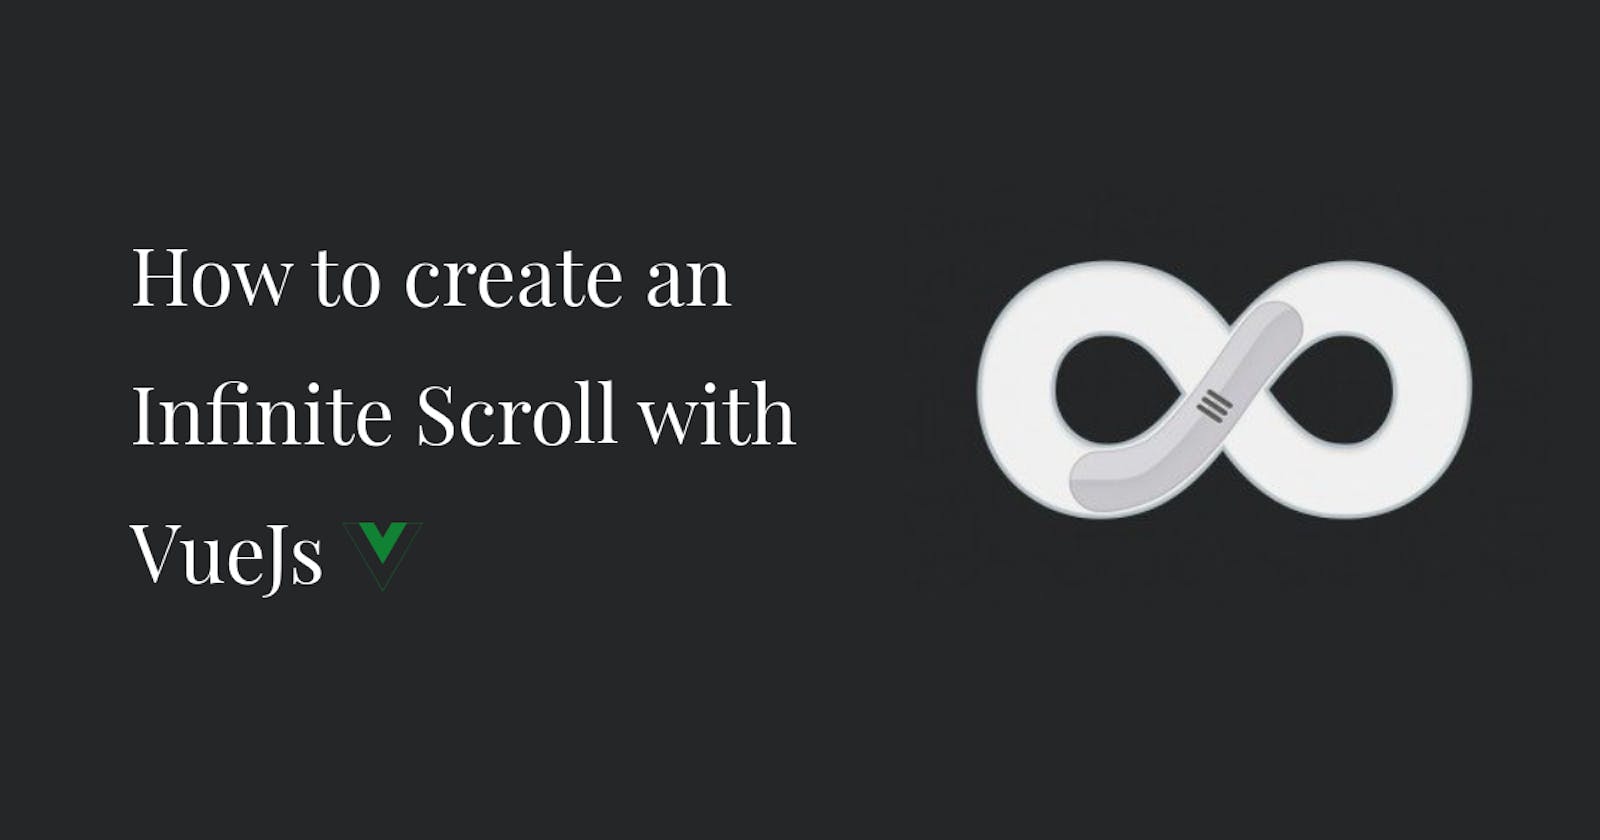 How to Create an infinite scroll with VueJs